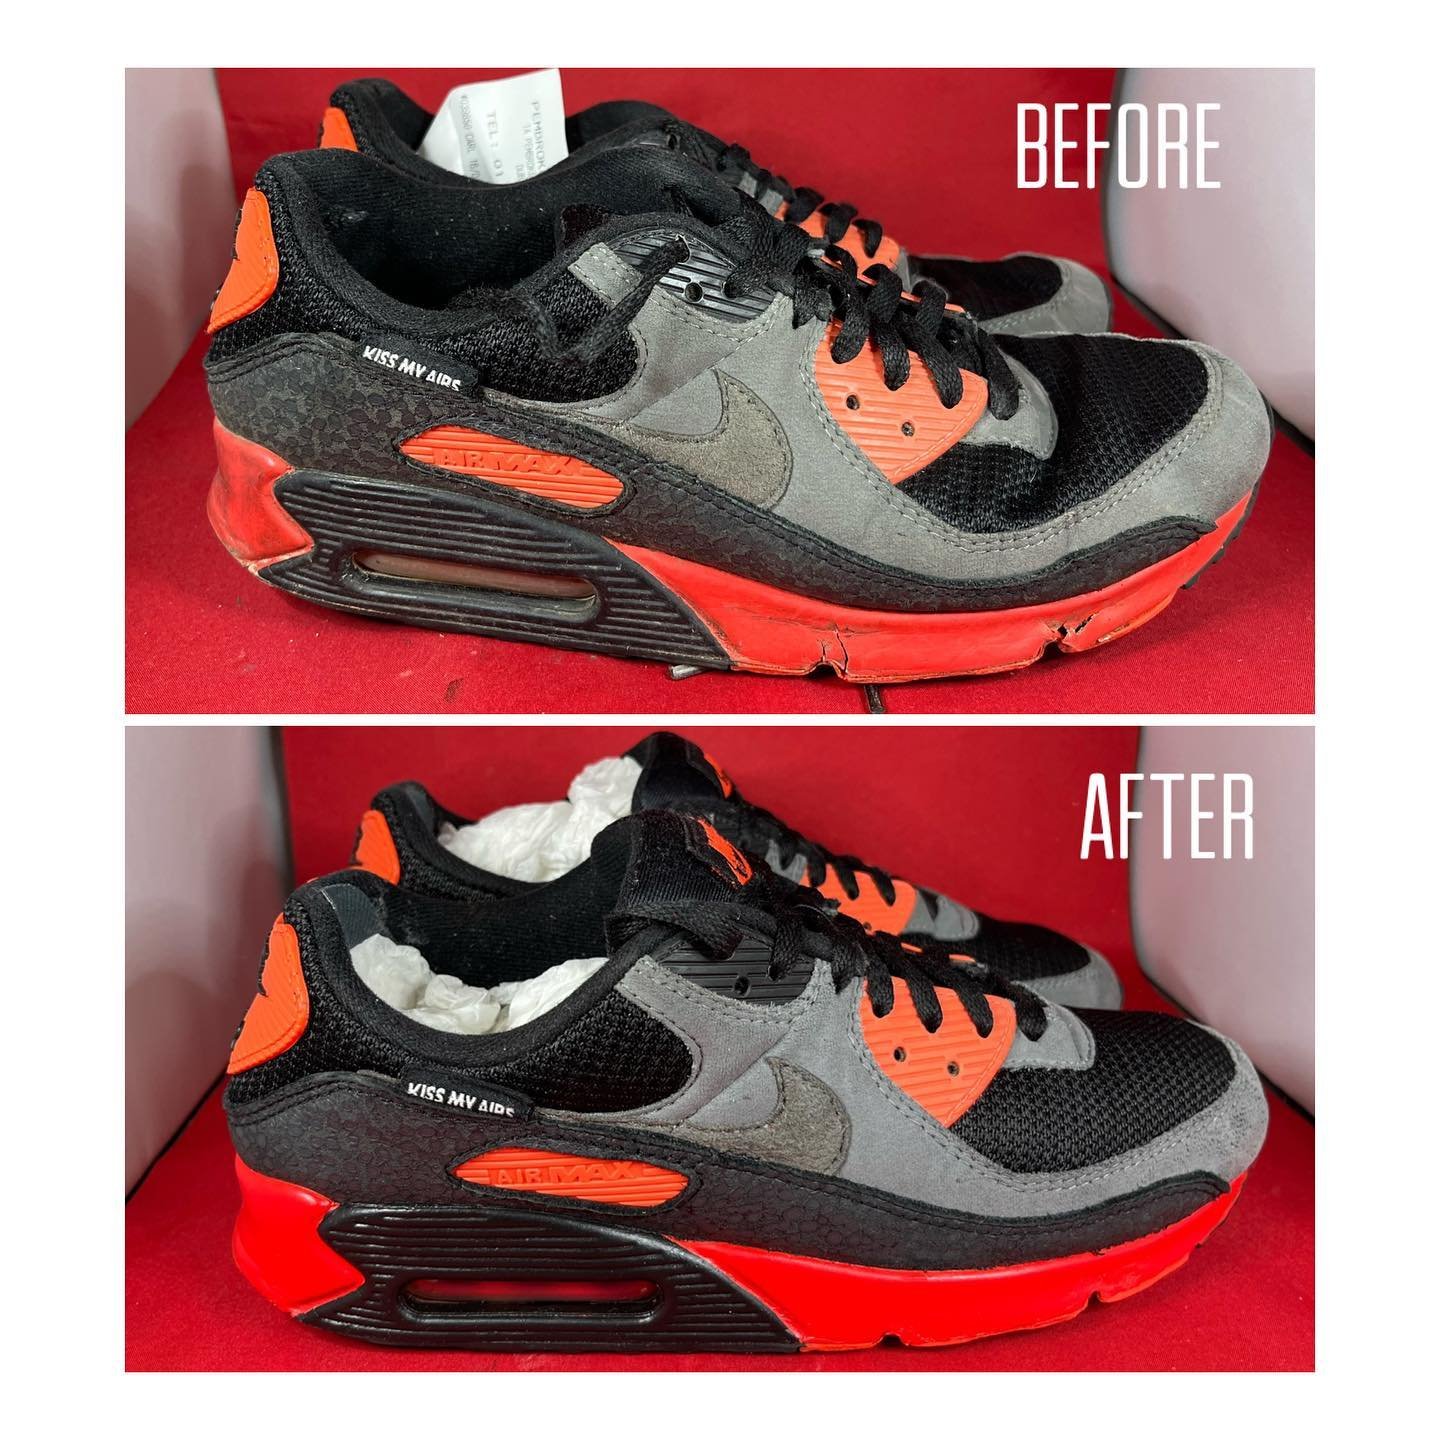 My client always wanted a pair of these #airmax90s and when he eventually got his hands on a pair he wore  them down so much that he couldn&rsquo;t wear them any more. We&rsquo;ve got this!! Deep cleaned. Filled all the cracks in the midsoles and did